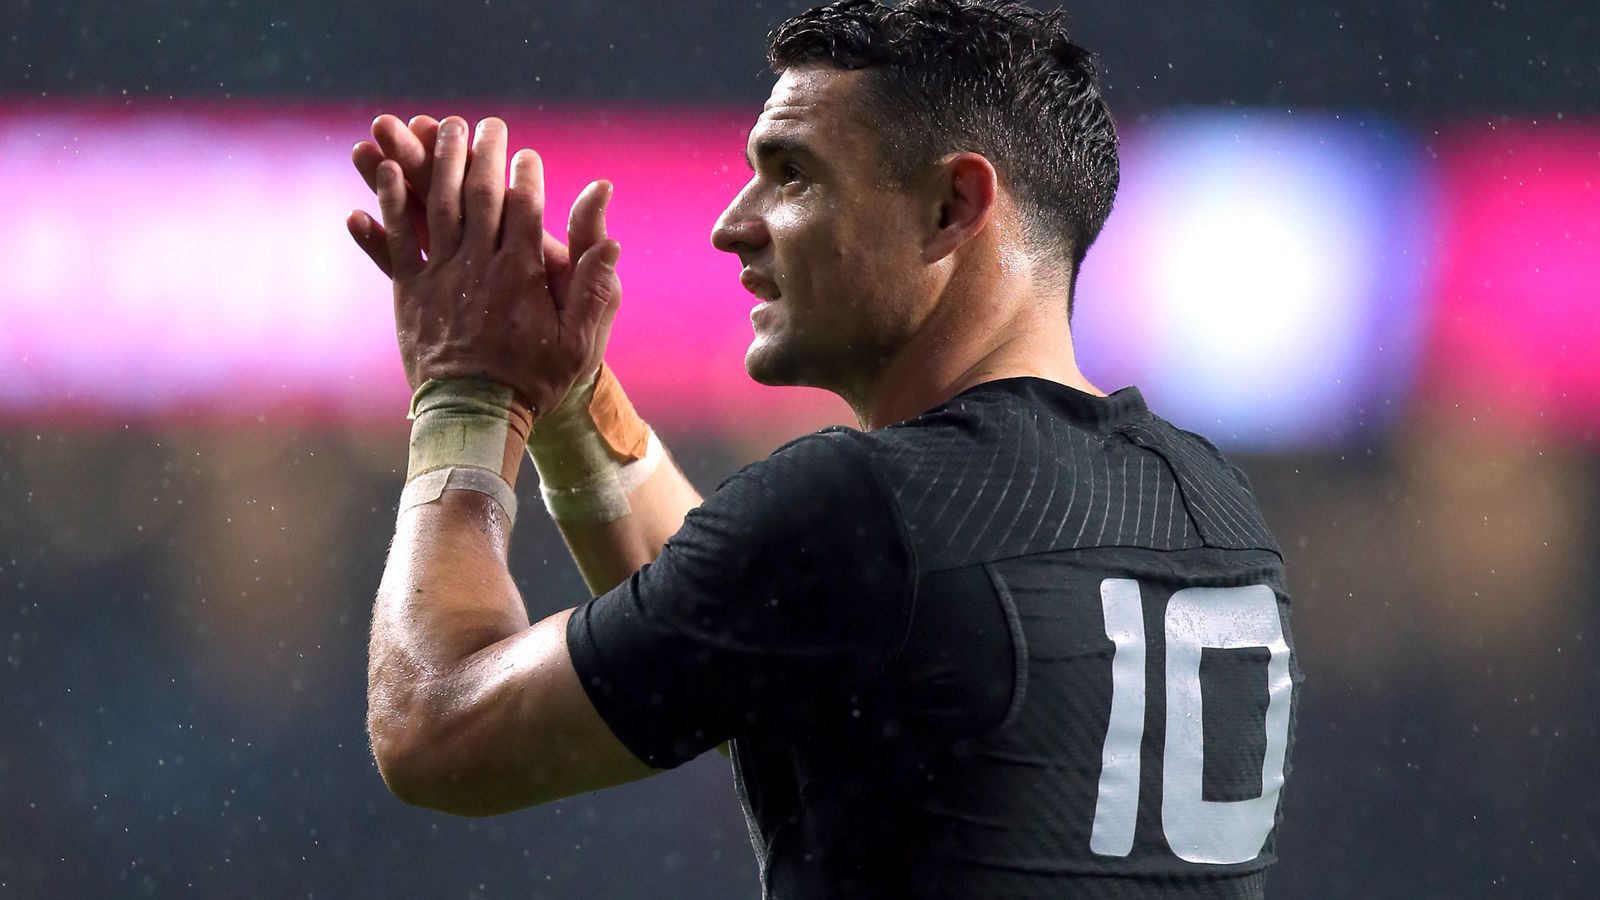 RUNY looking to sign All Blacks great Dan Carter - Americas Rugby News